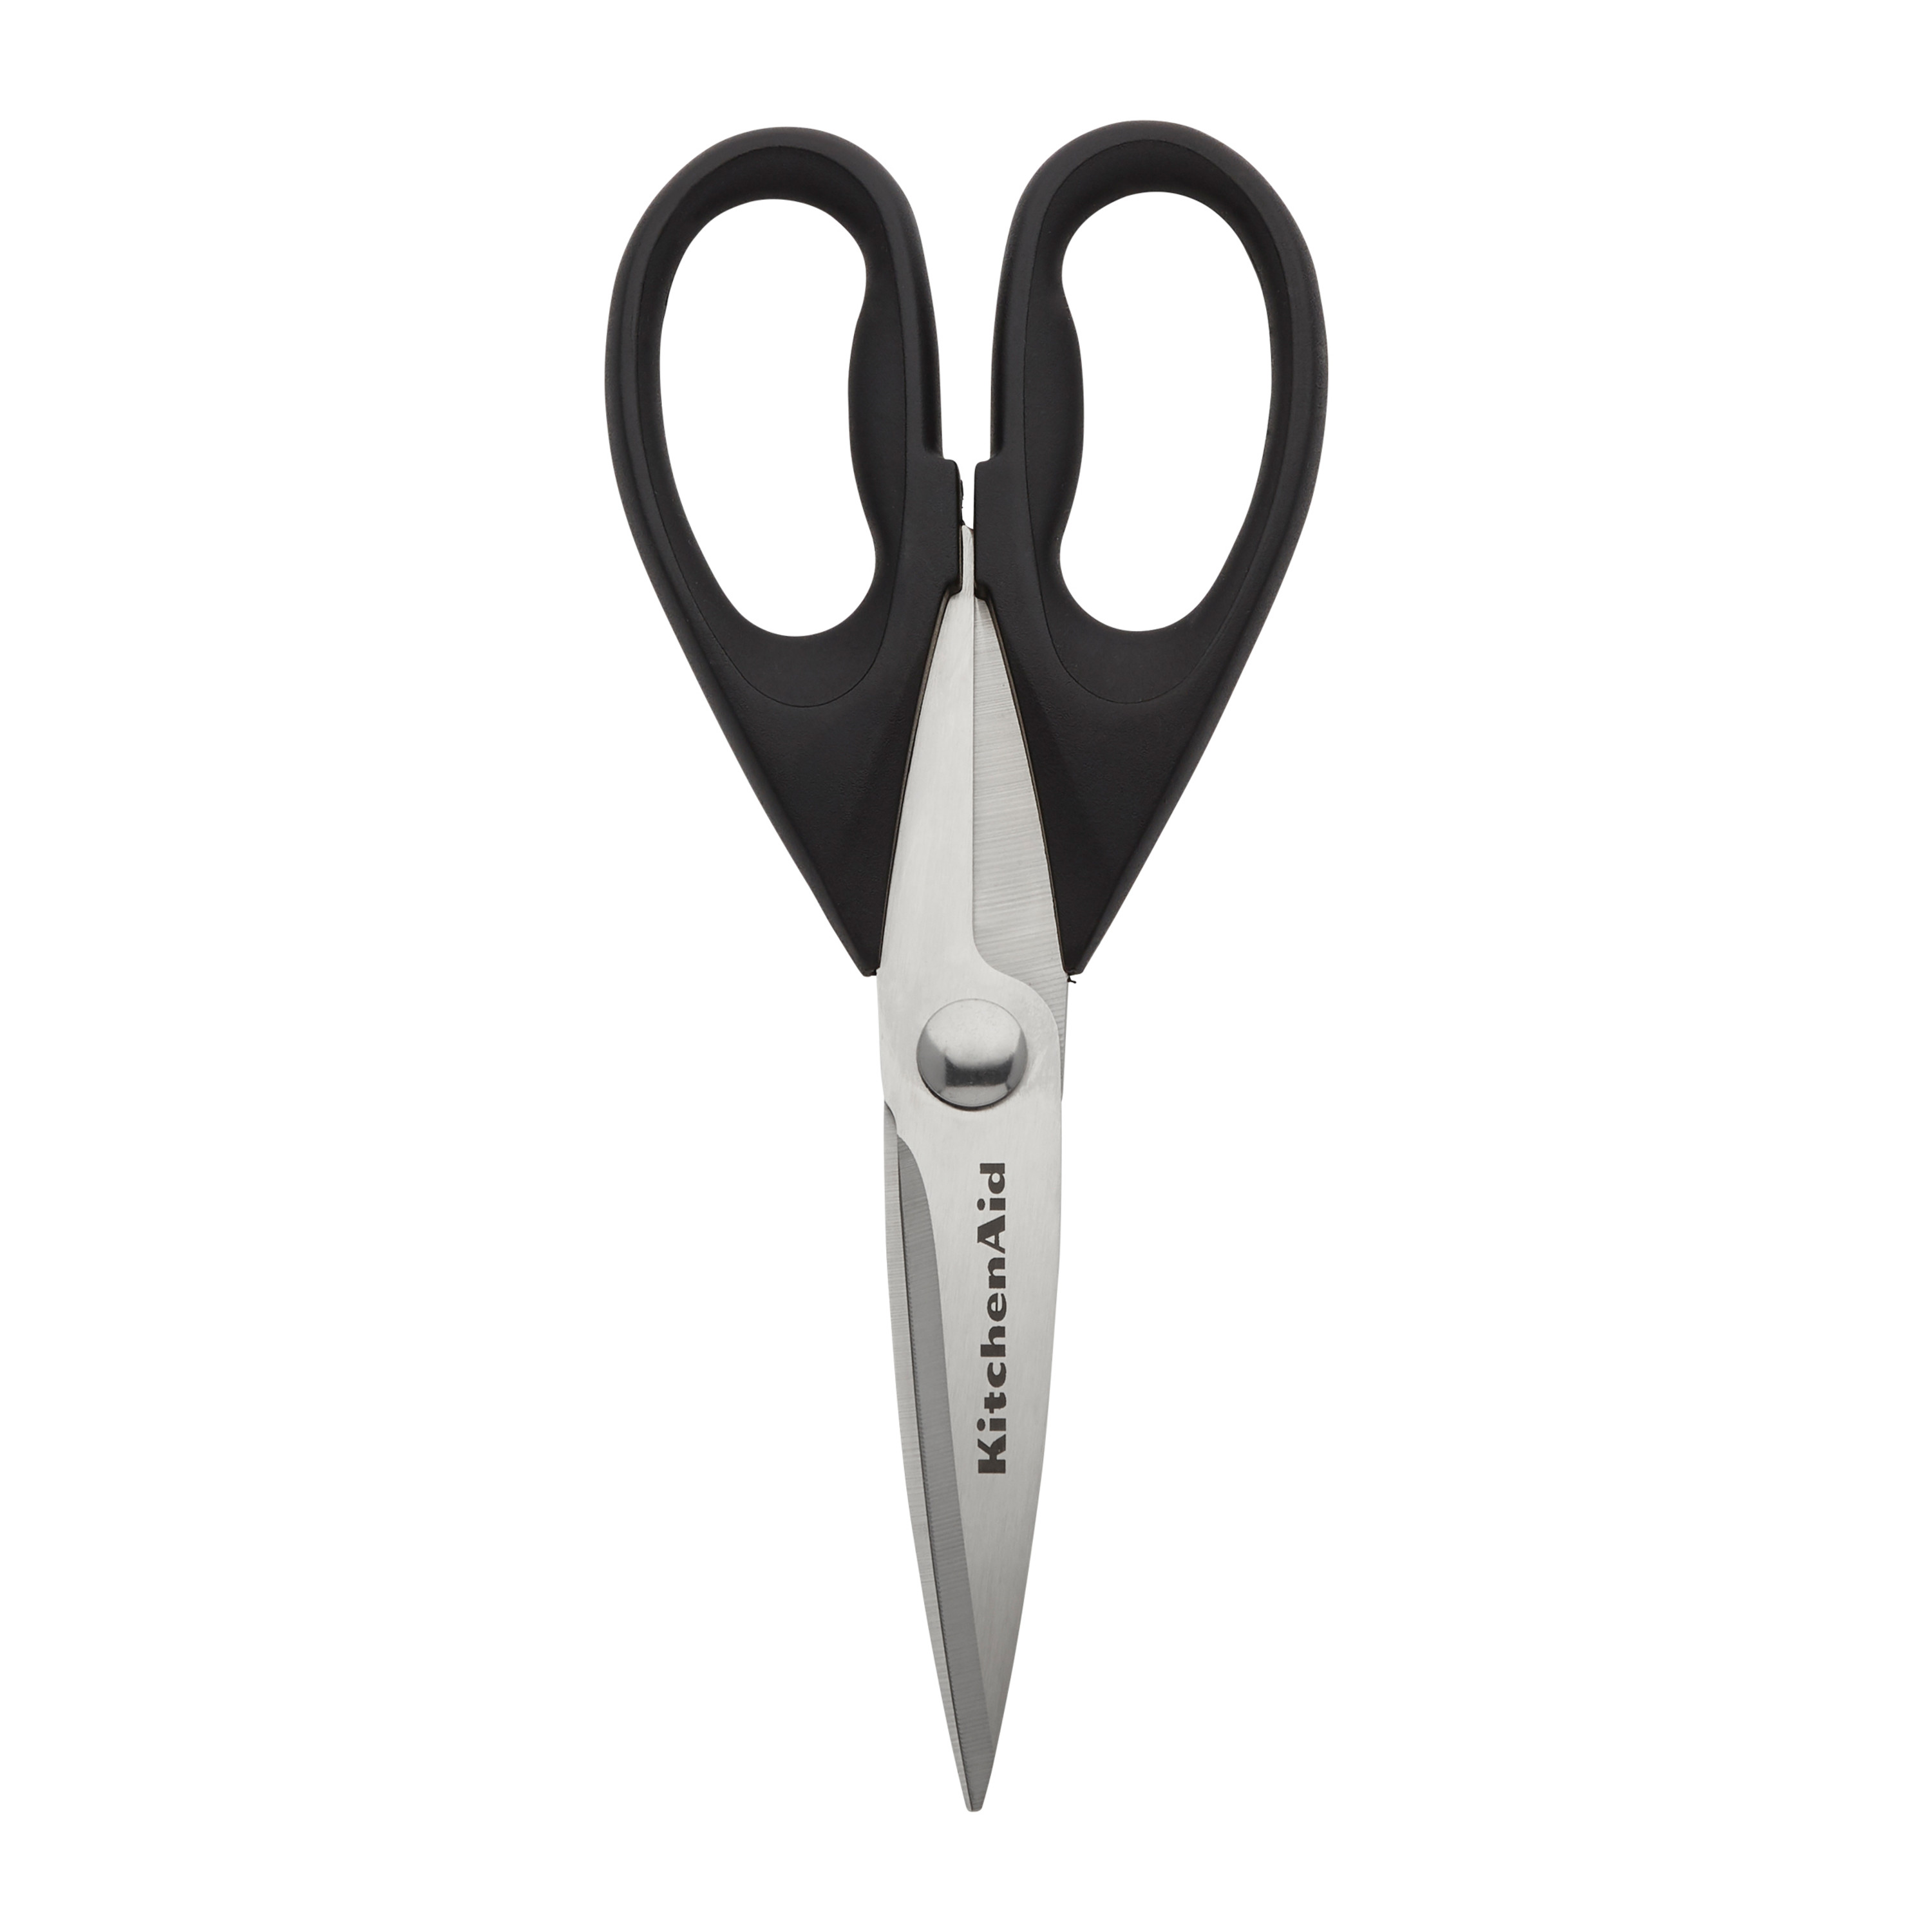 Kitchenaid Soft Grip All Purpose Shears with Black Handle and Protective  Sheath 